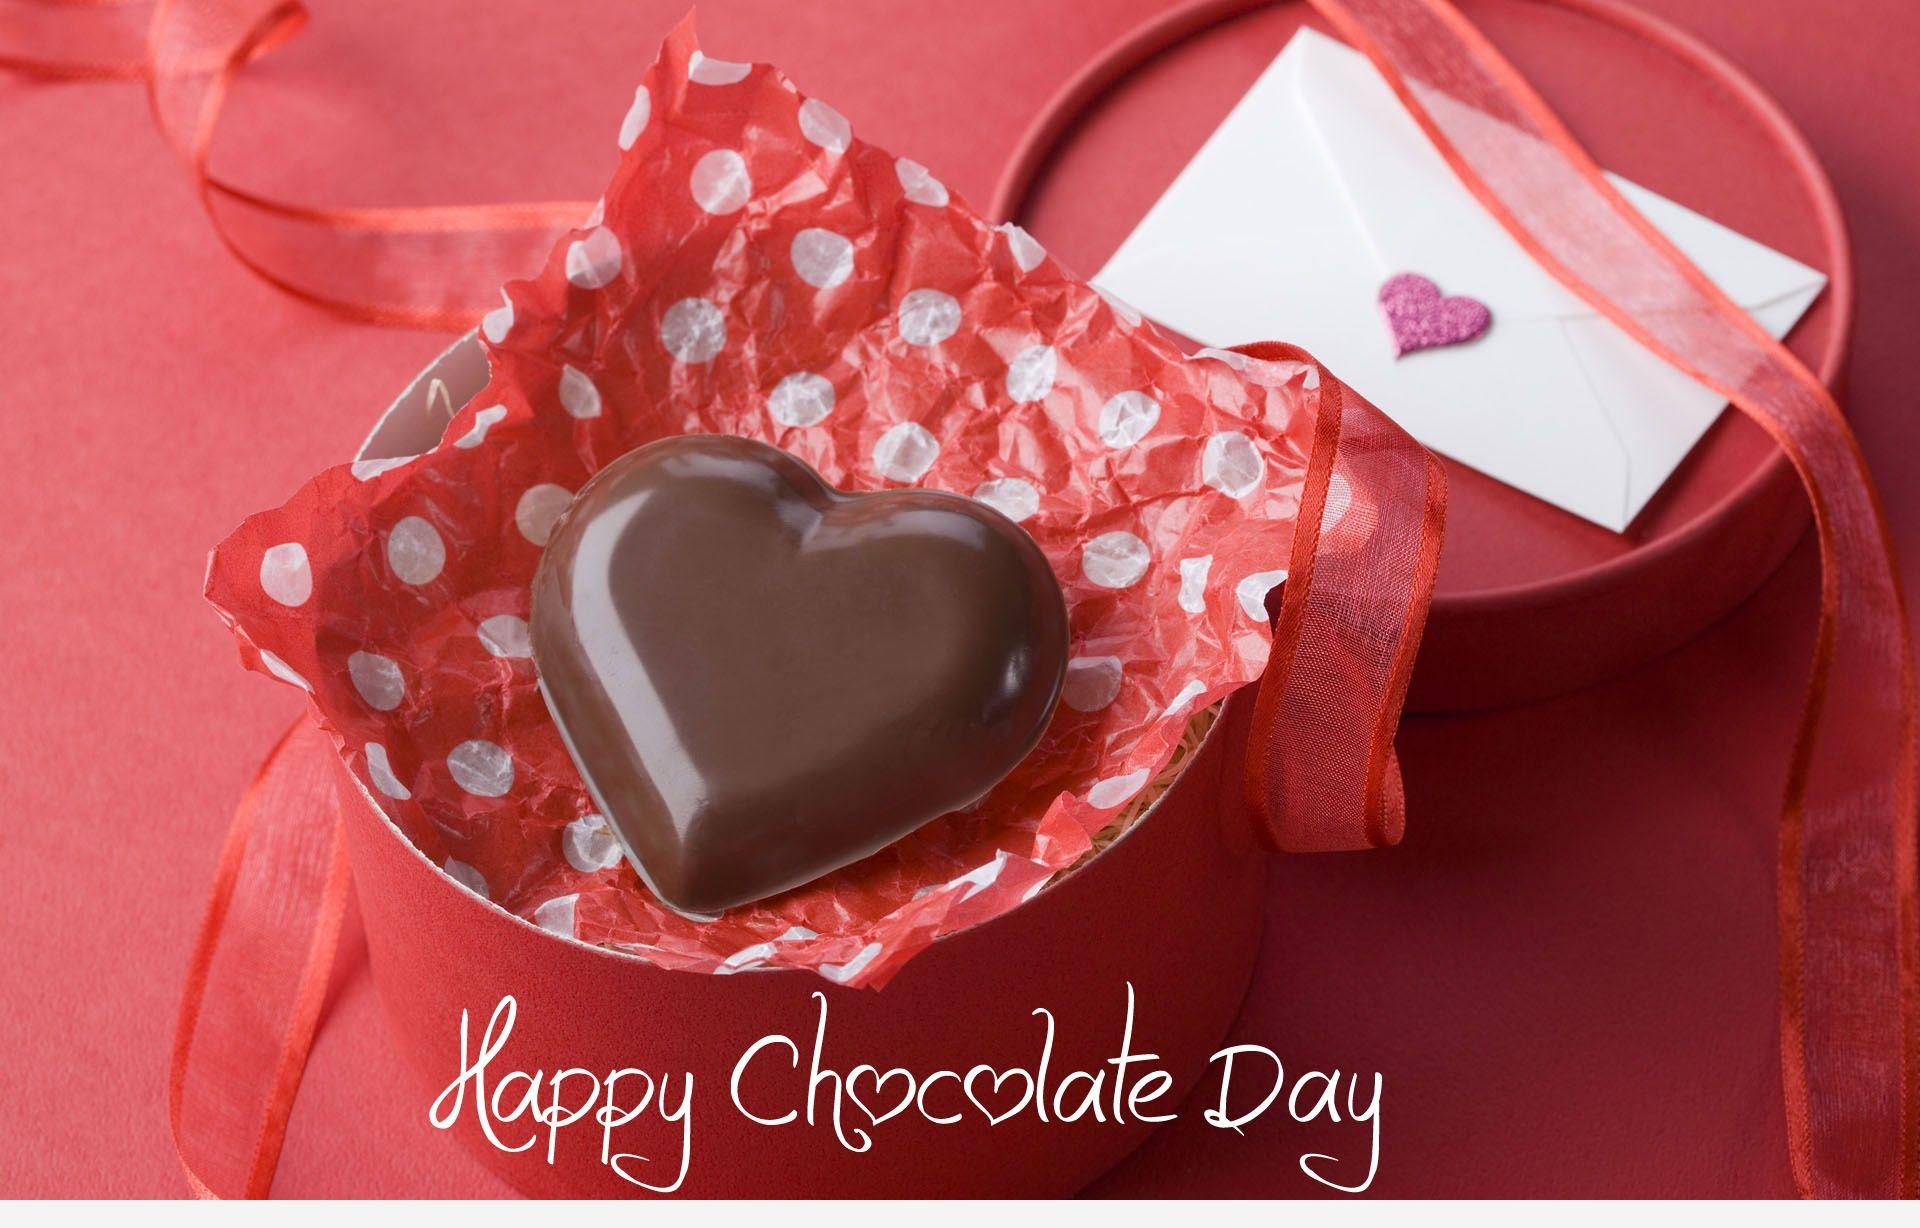 HD Wallpaper. Happy chocolate day, Chocolate day